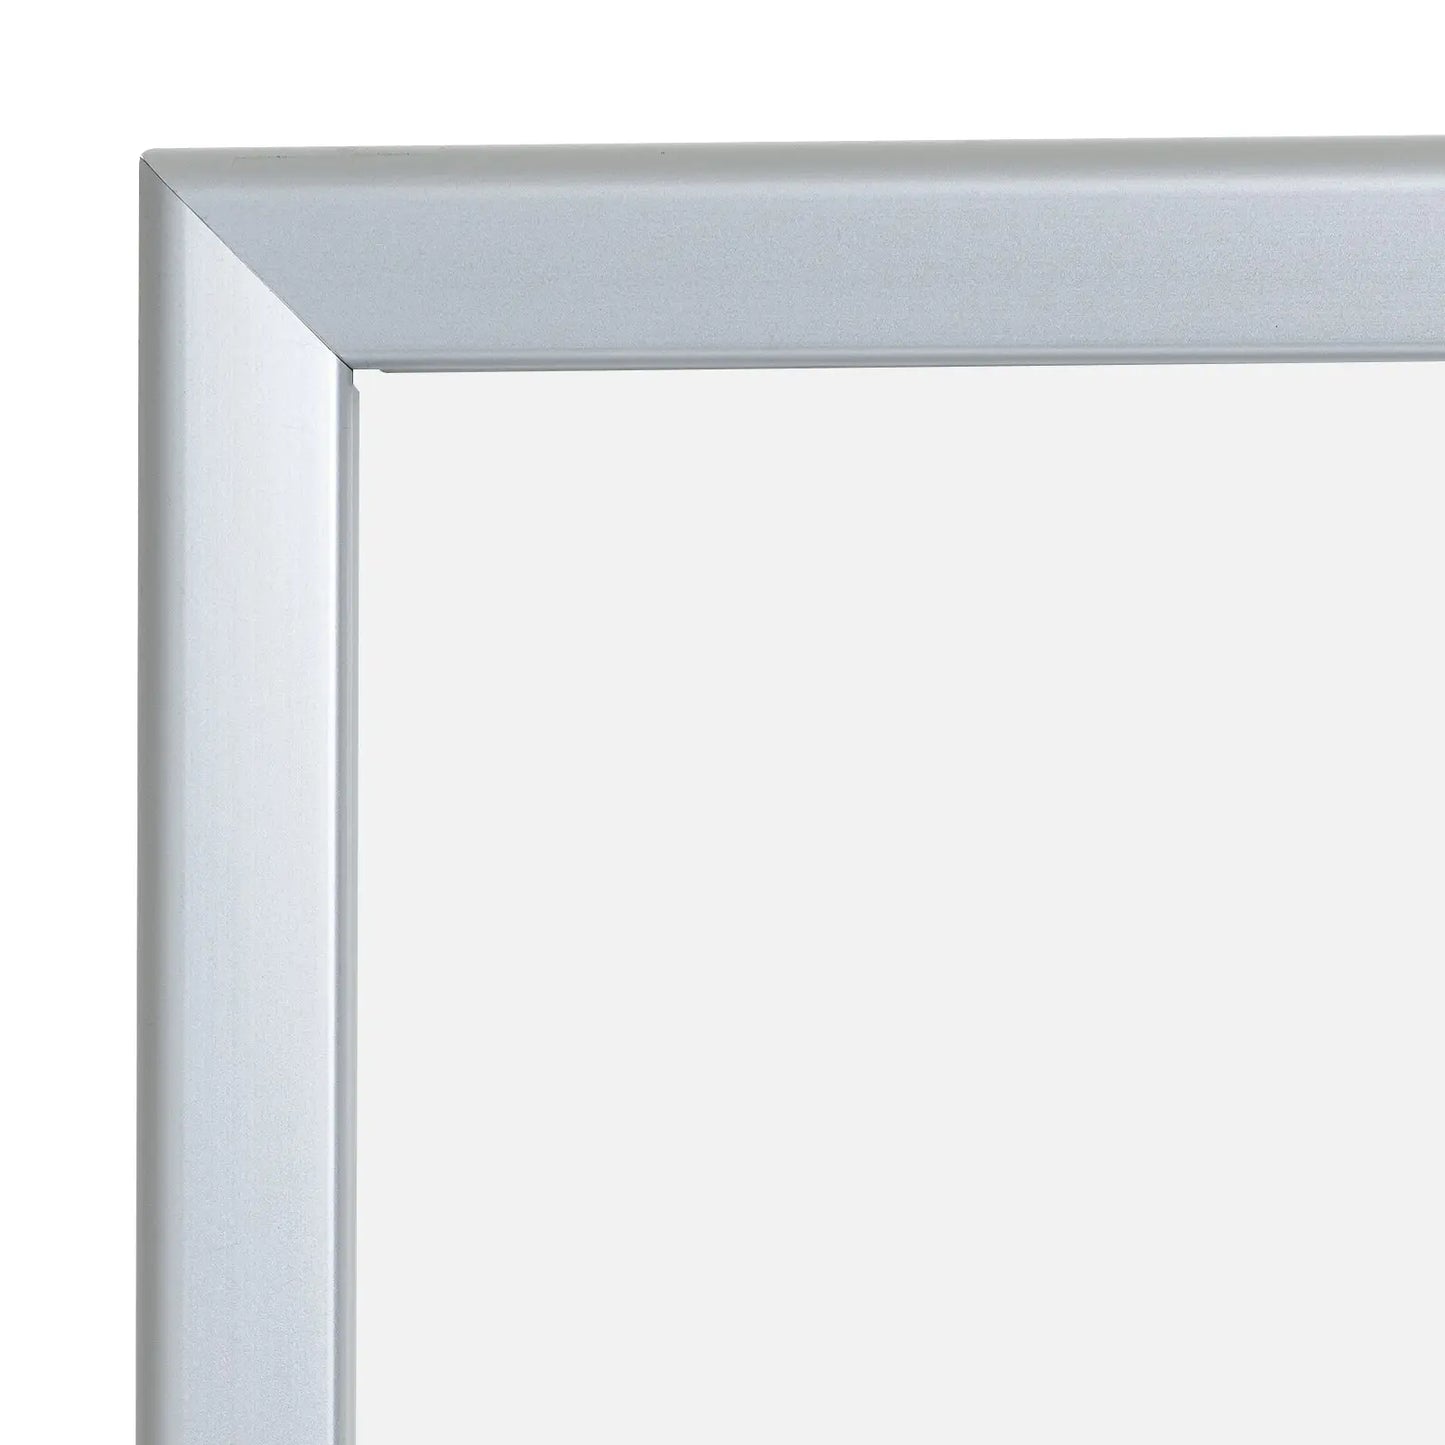 18x24 Lockable Snap Poster Frame - 1.25 inch Silver Mitered Profile